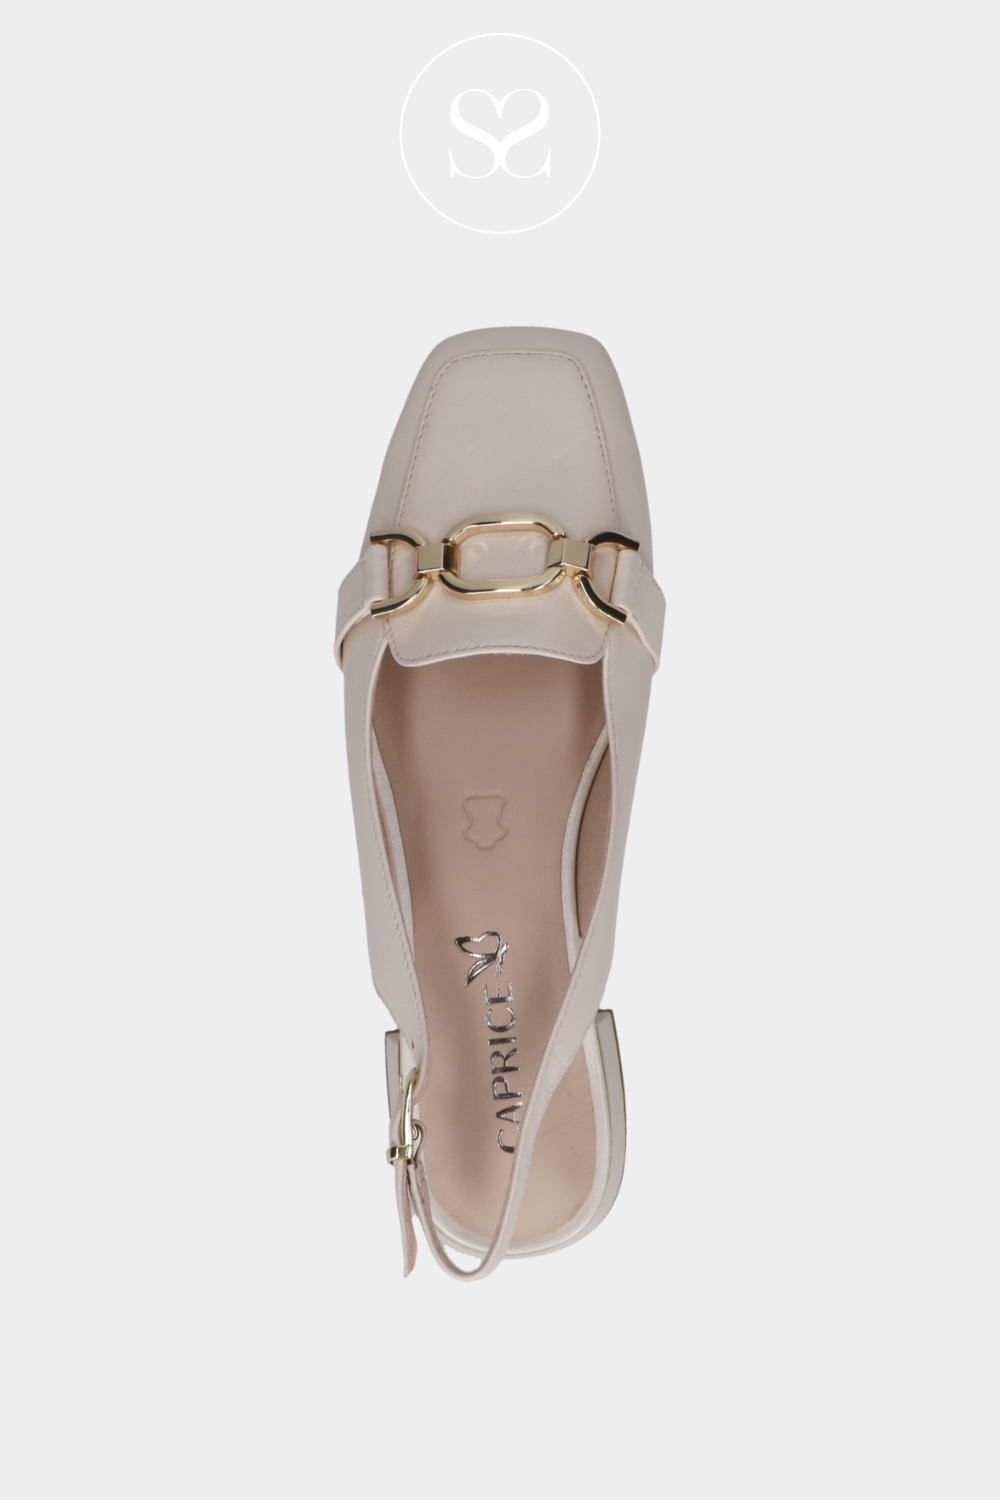 CAPRICE 9-29400-42 CREAM SLINGBACK FLAT PUMP WITH ADJUSTABLE STRAP AND GOLD BUCKLE